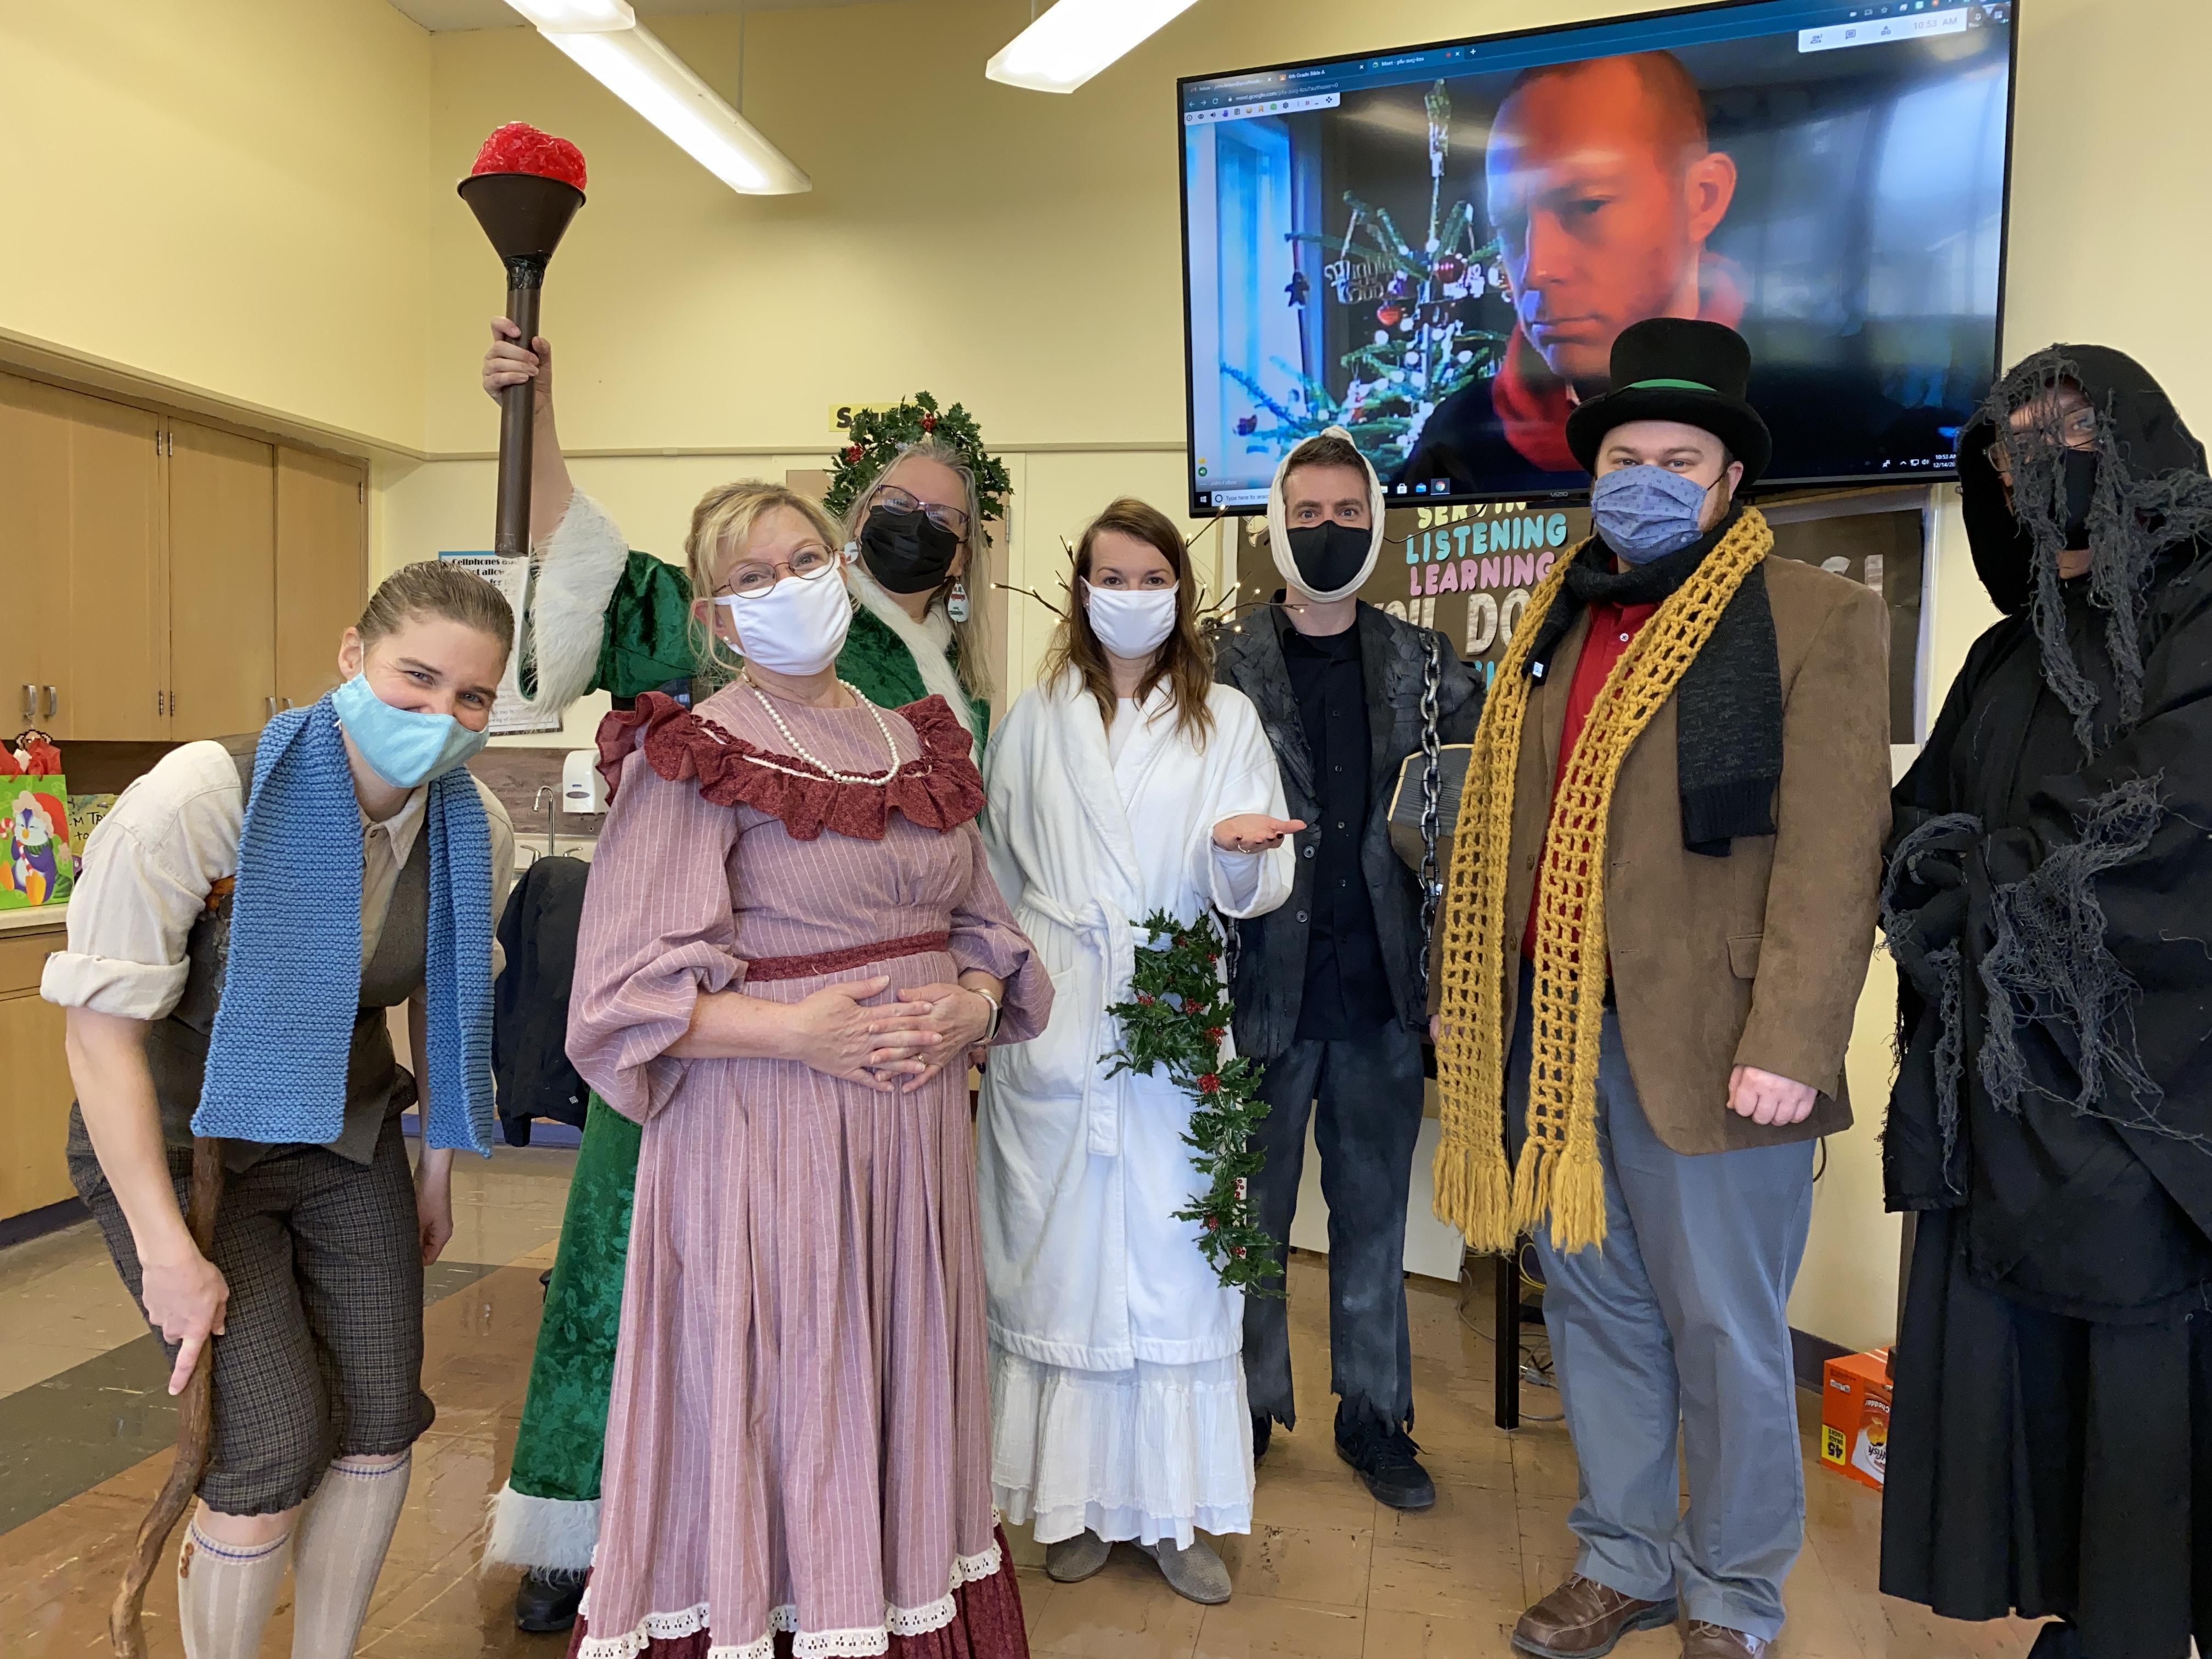 Teachers as characters from the Christmas Carol